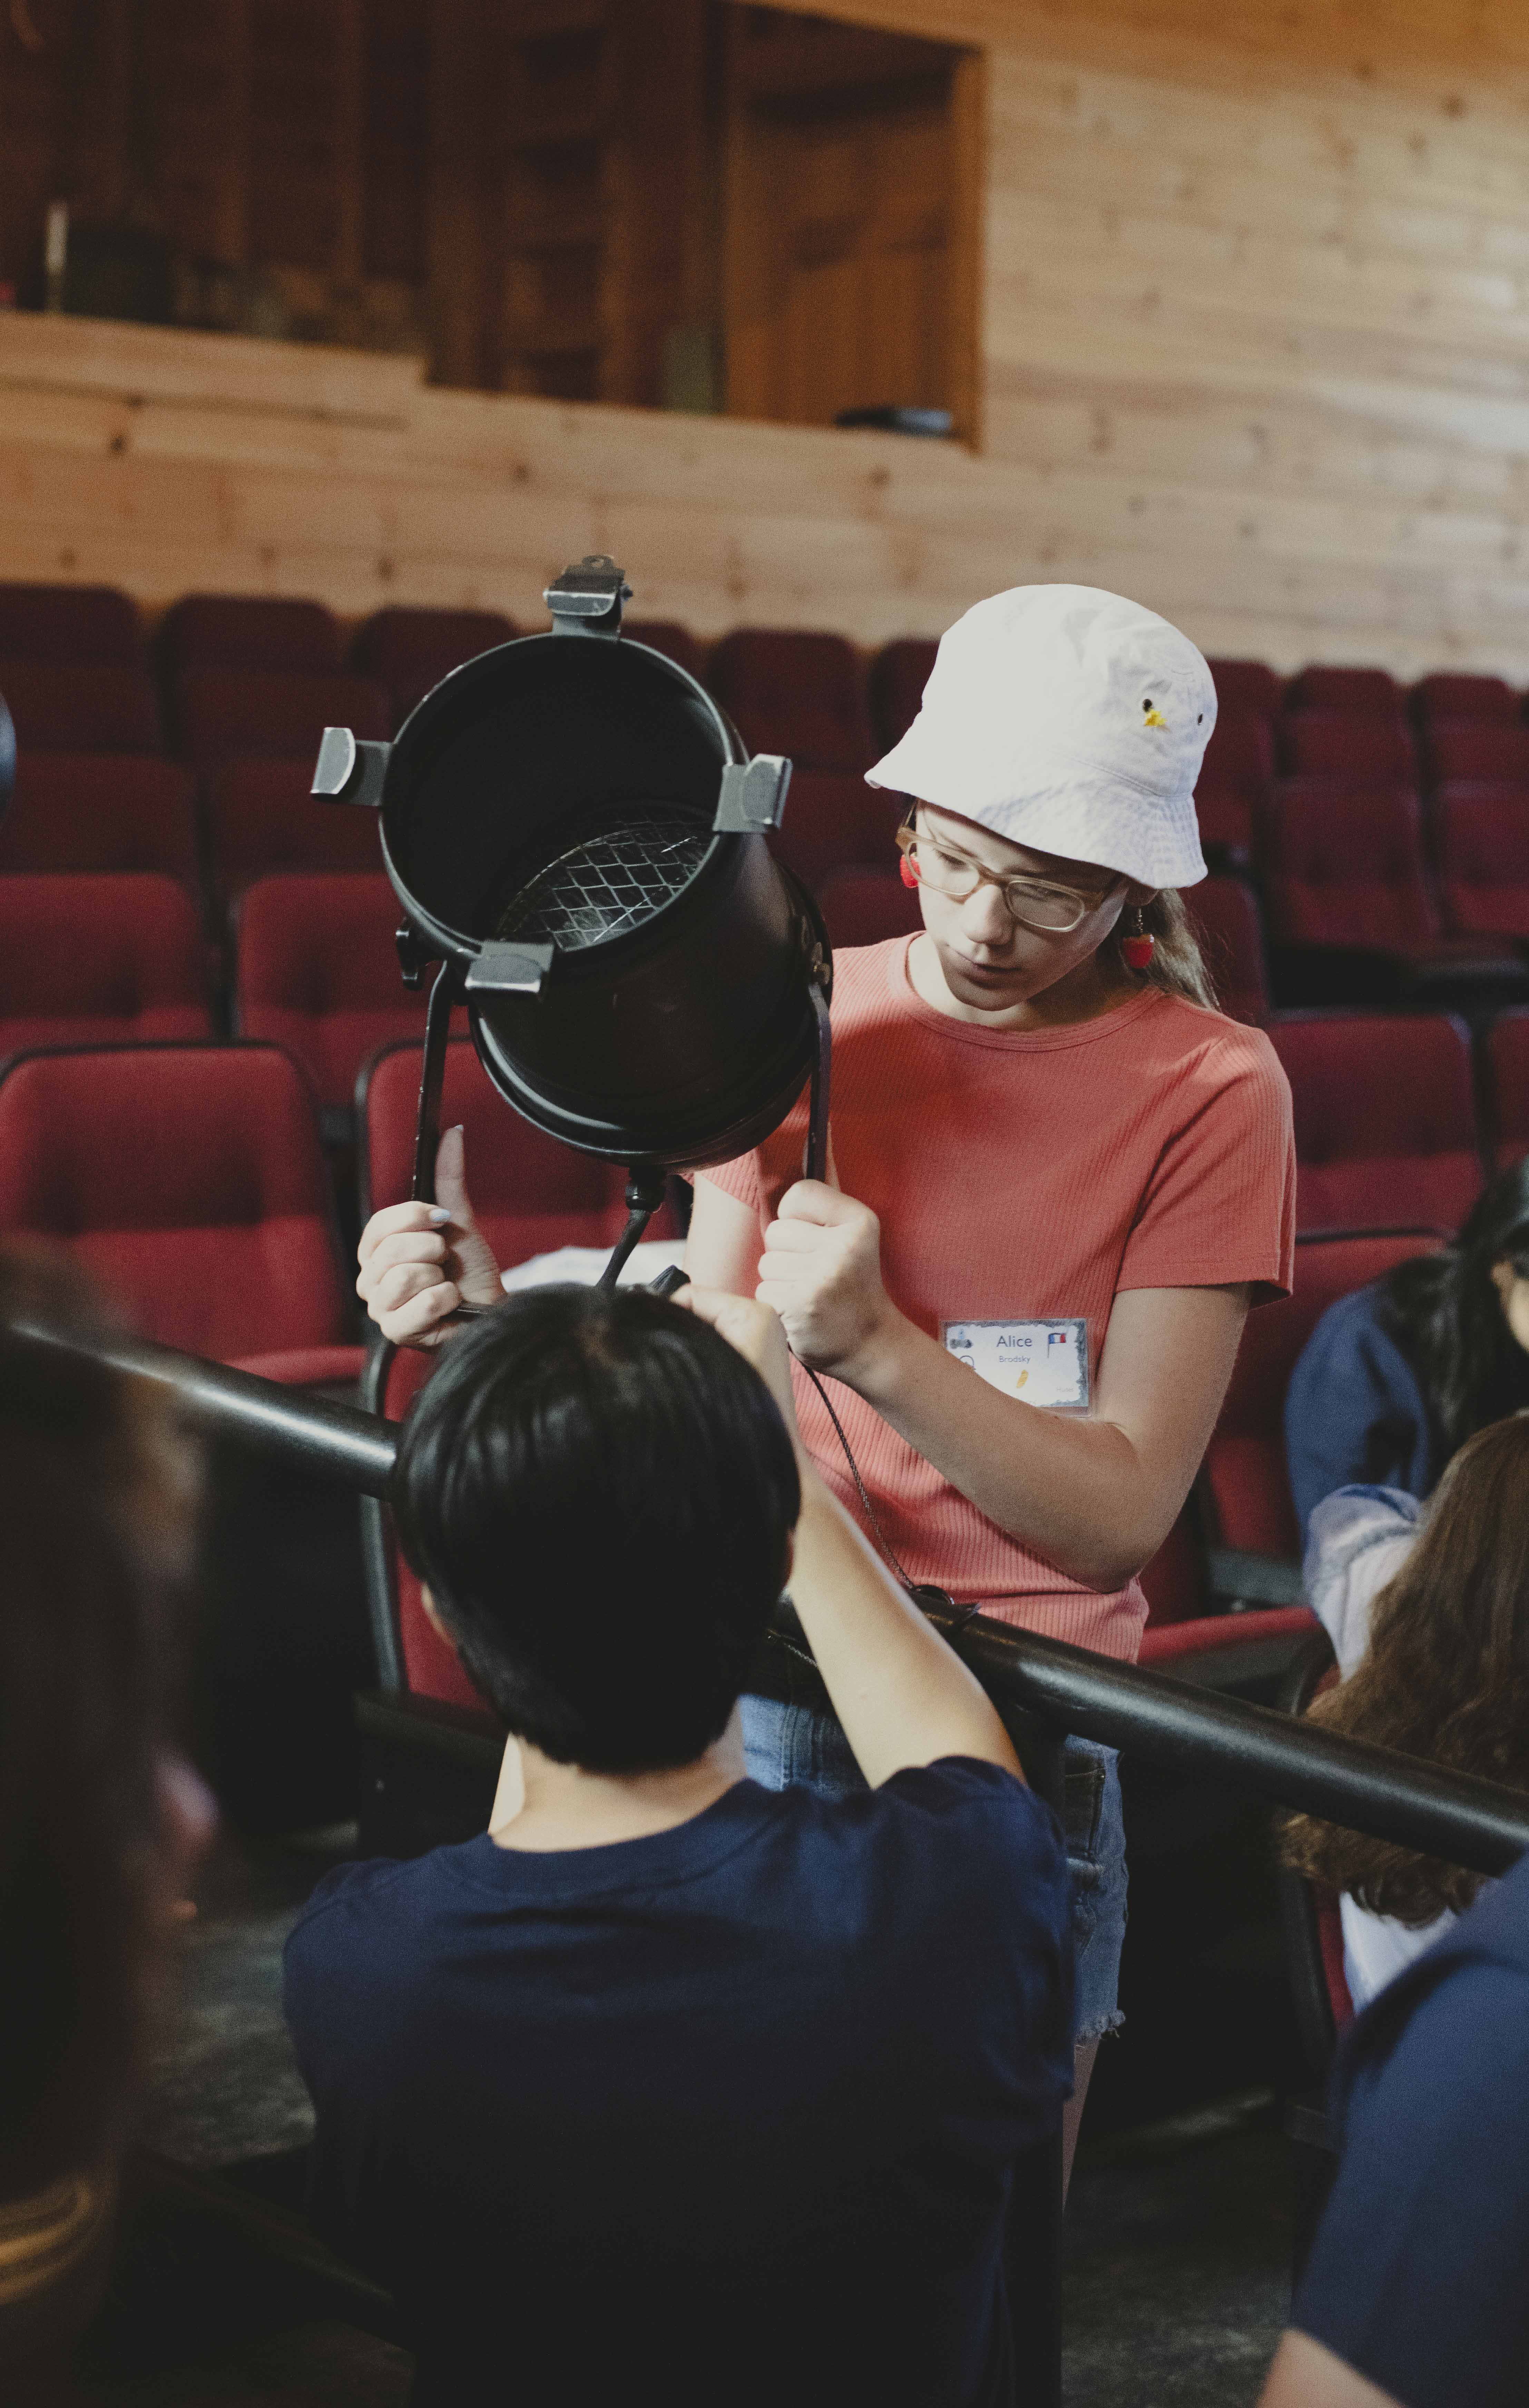 A camper learns how to harness a light fixture in the theater